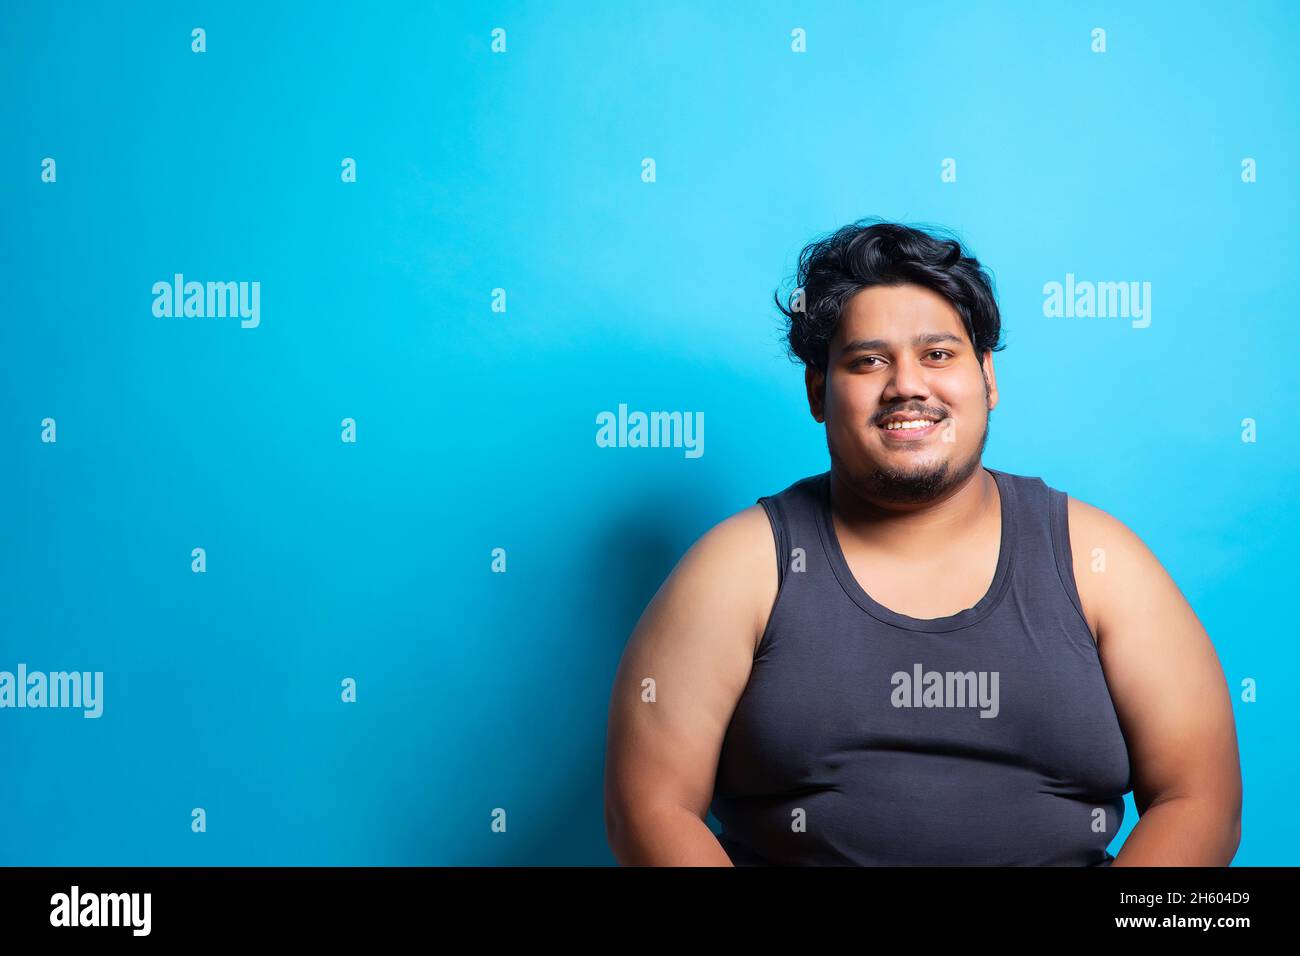 Portrait of a fat man sitting and smiling against plain background. Stock Photo